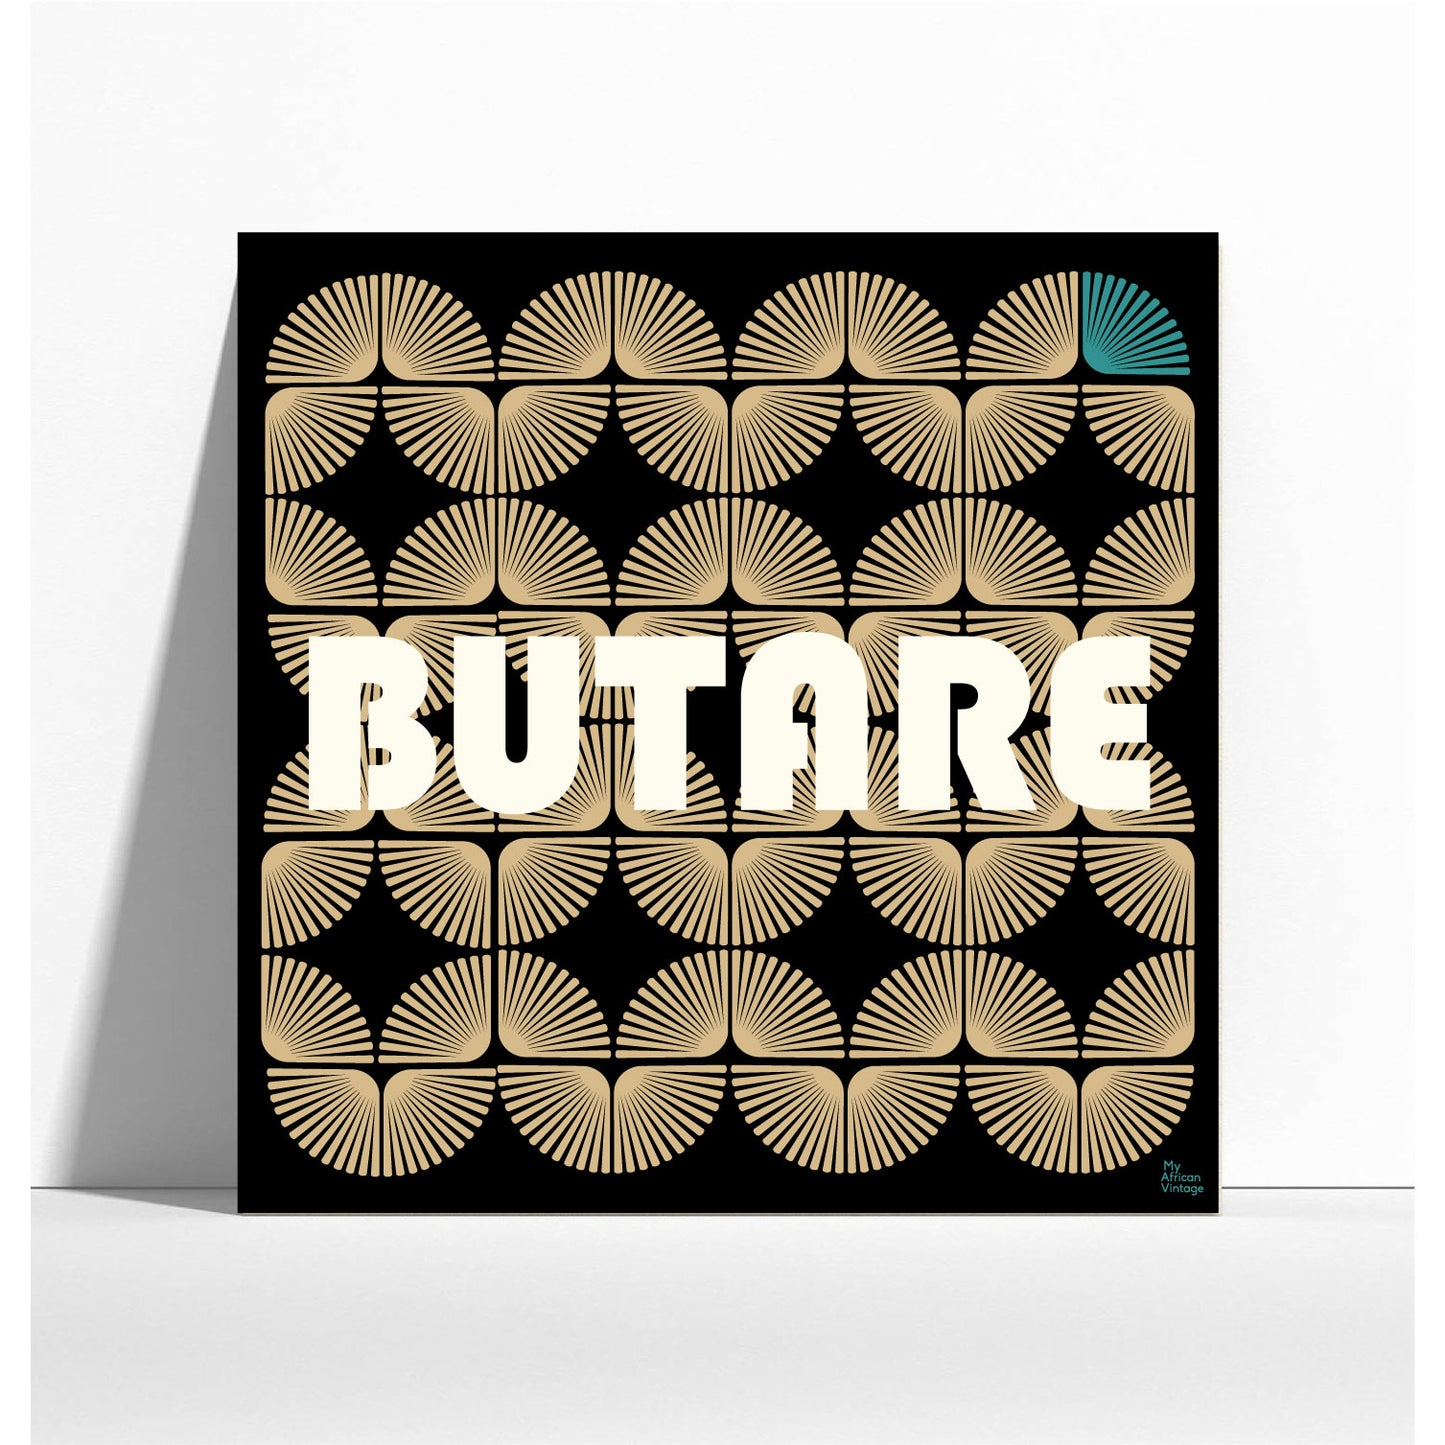 "Butare" retro style poster  - "My African Vintage" collection 